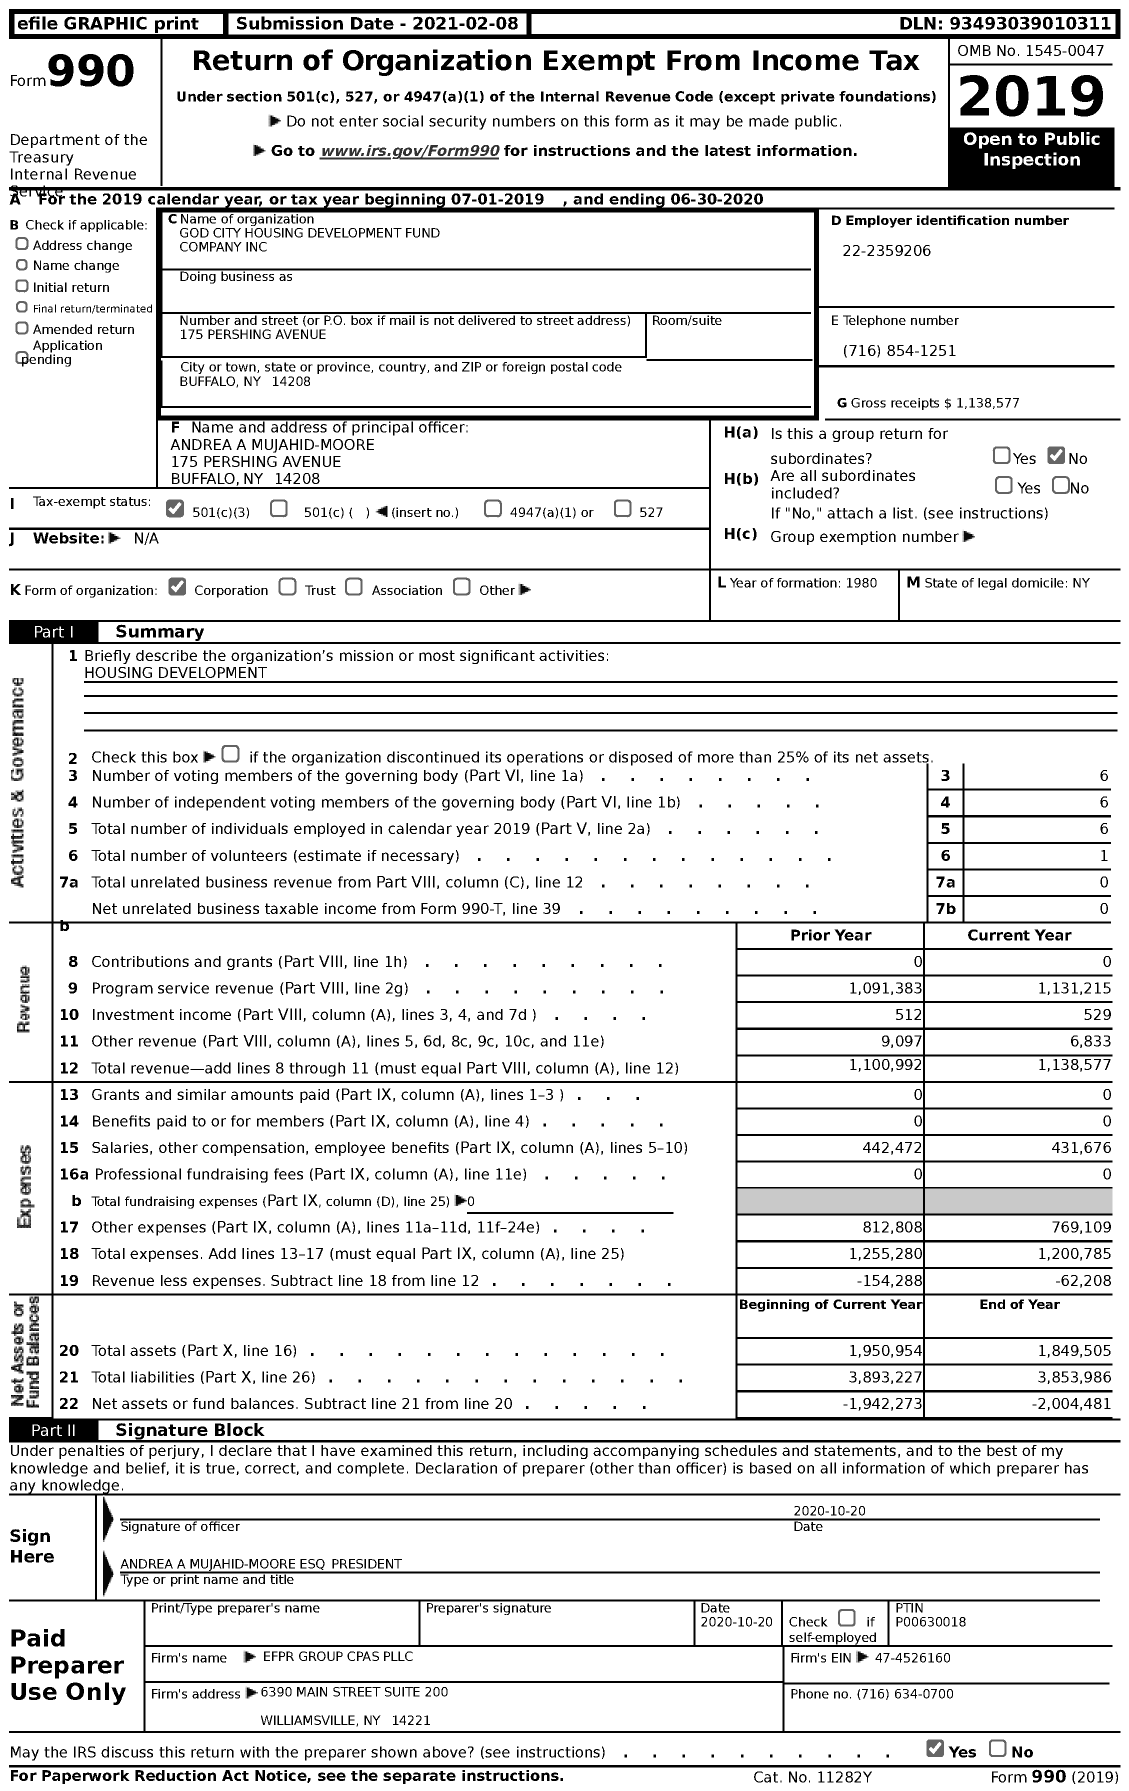 Image of first page of 2019 Form 990 for God City Housing Development Fund Company